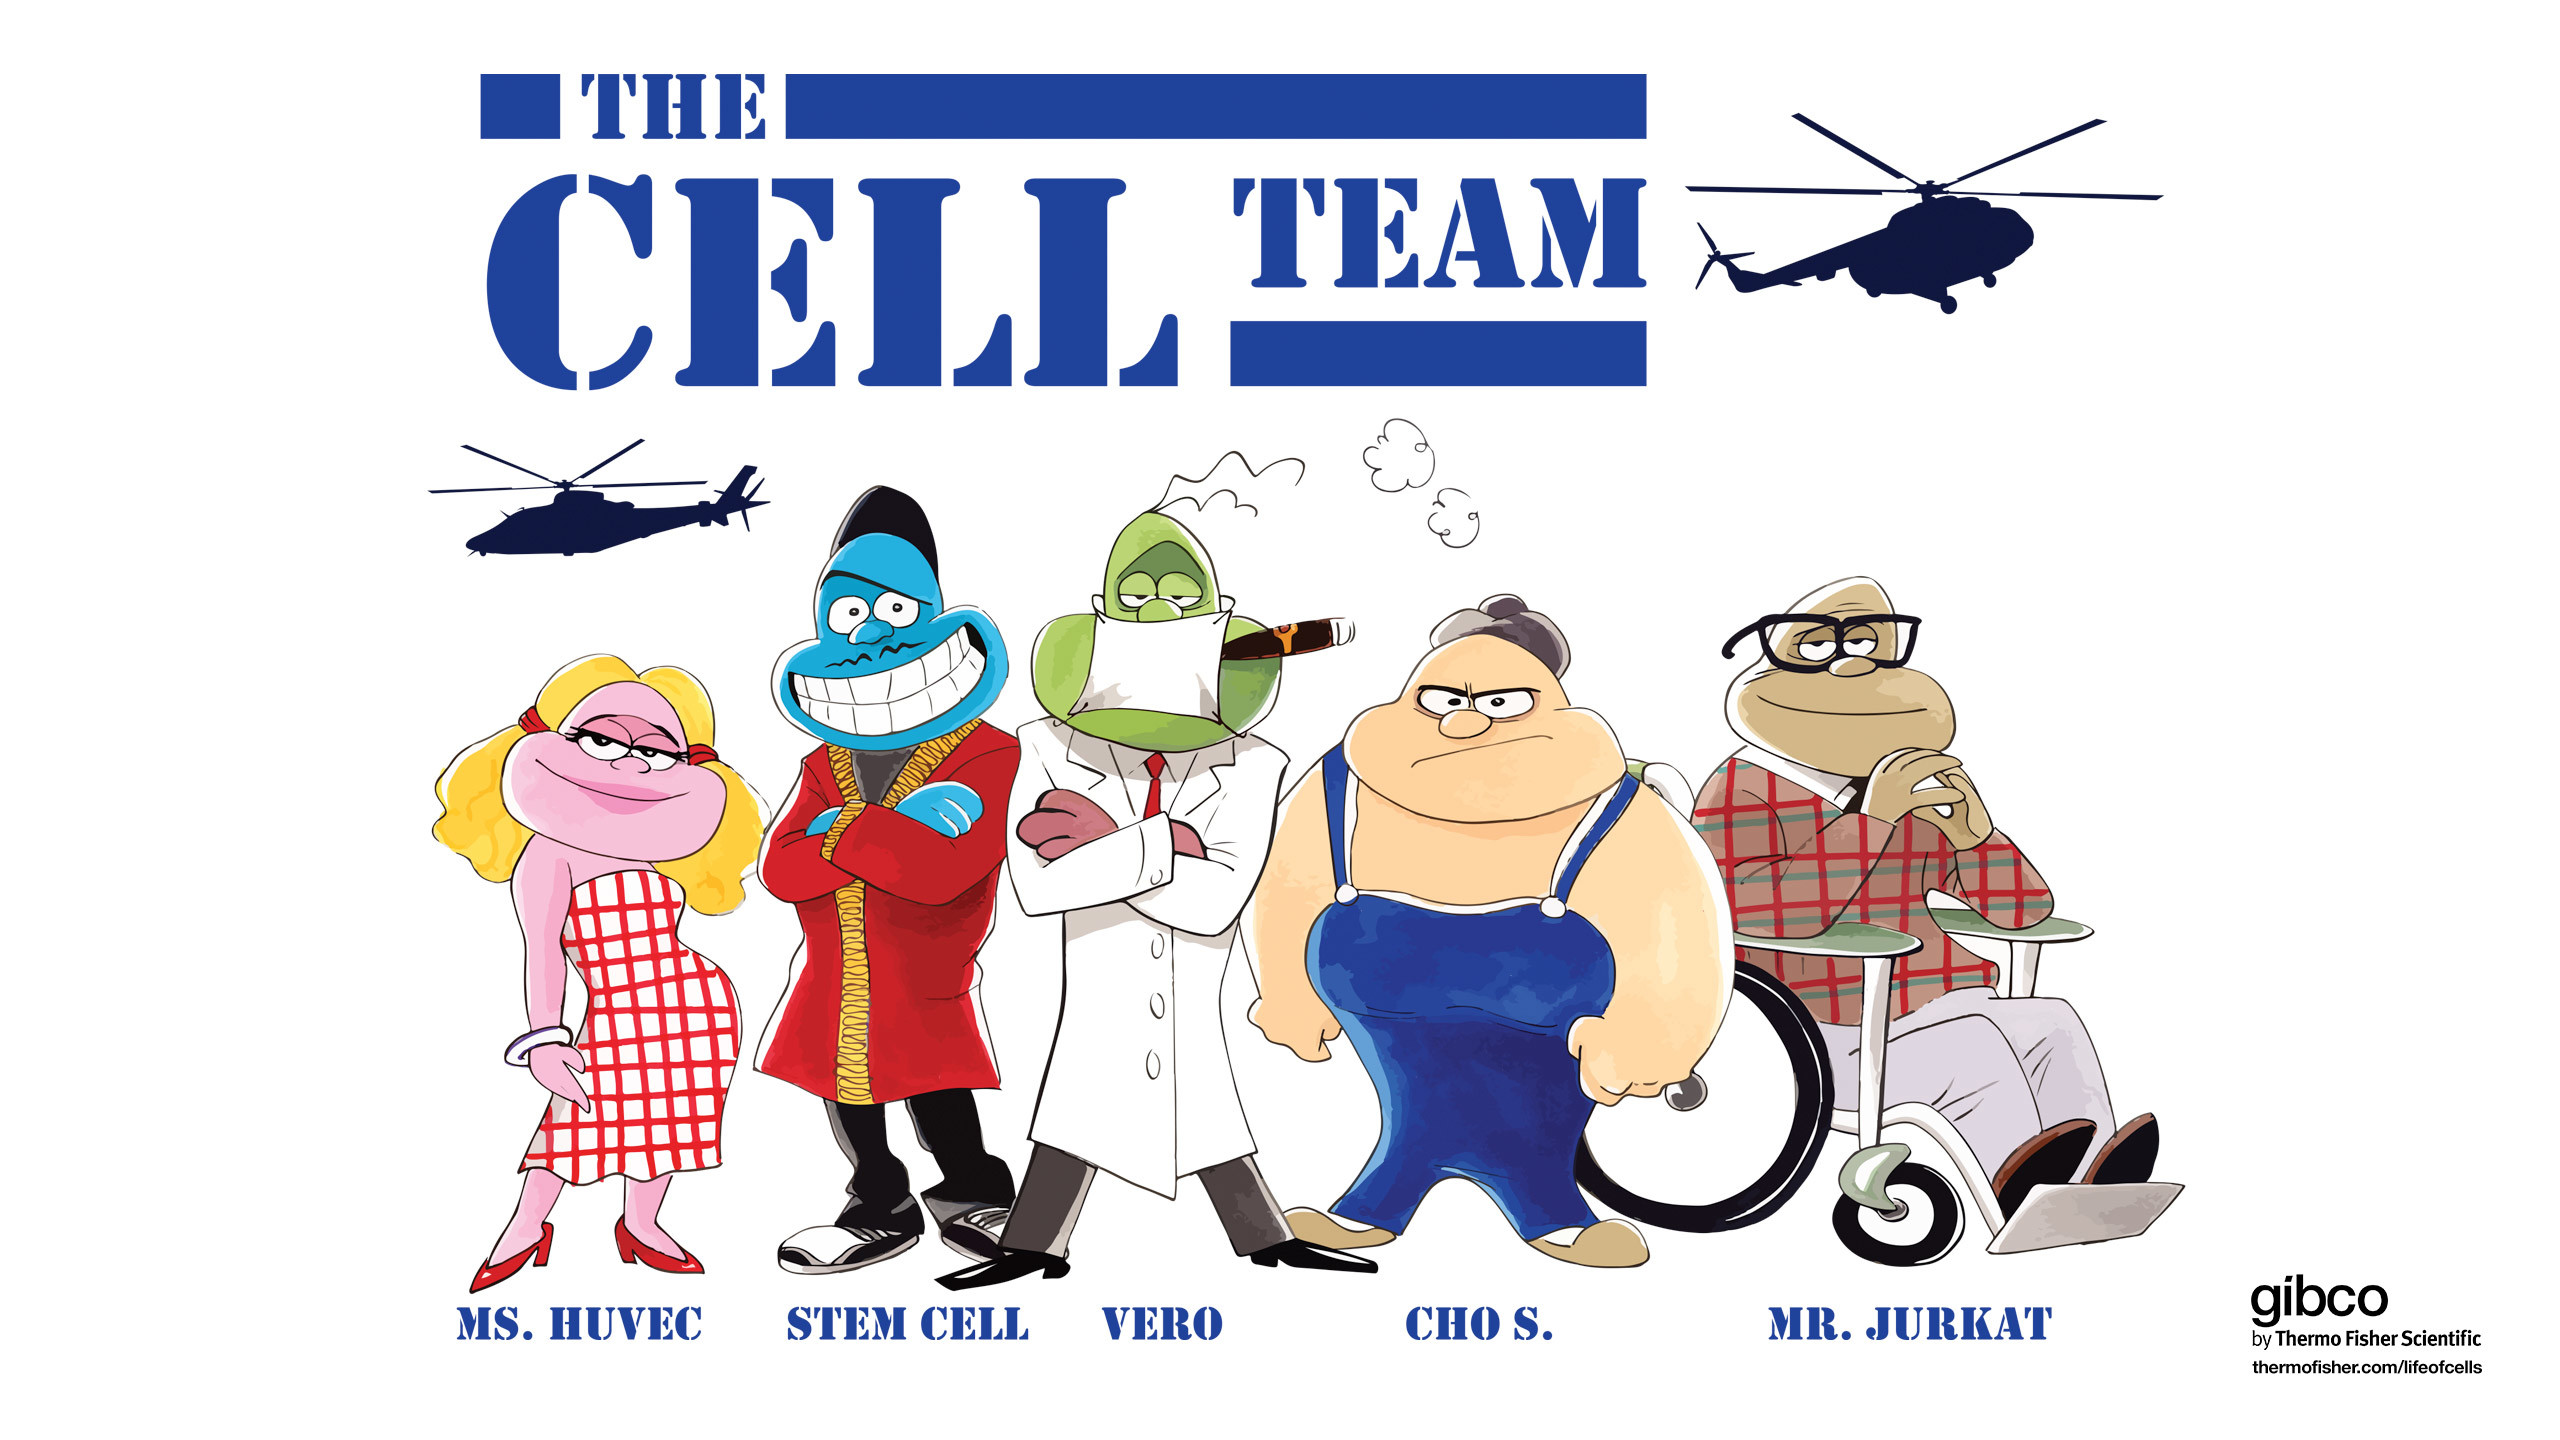 2560x1440 "The Cell Team" Download wallpaper (Hi-res px)